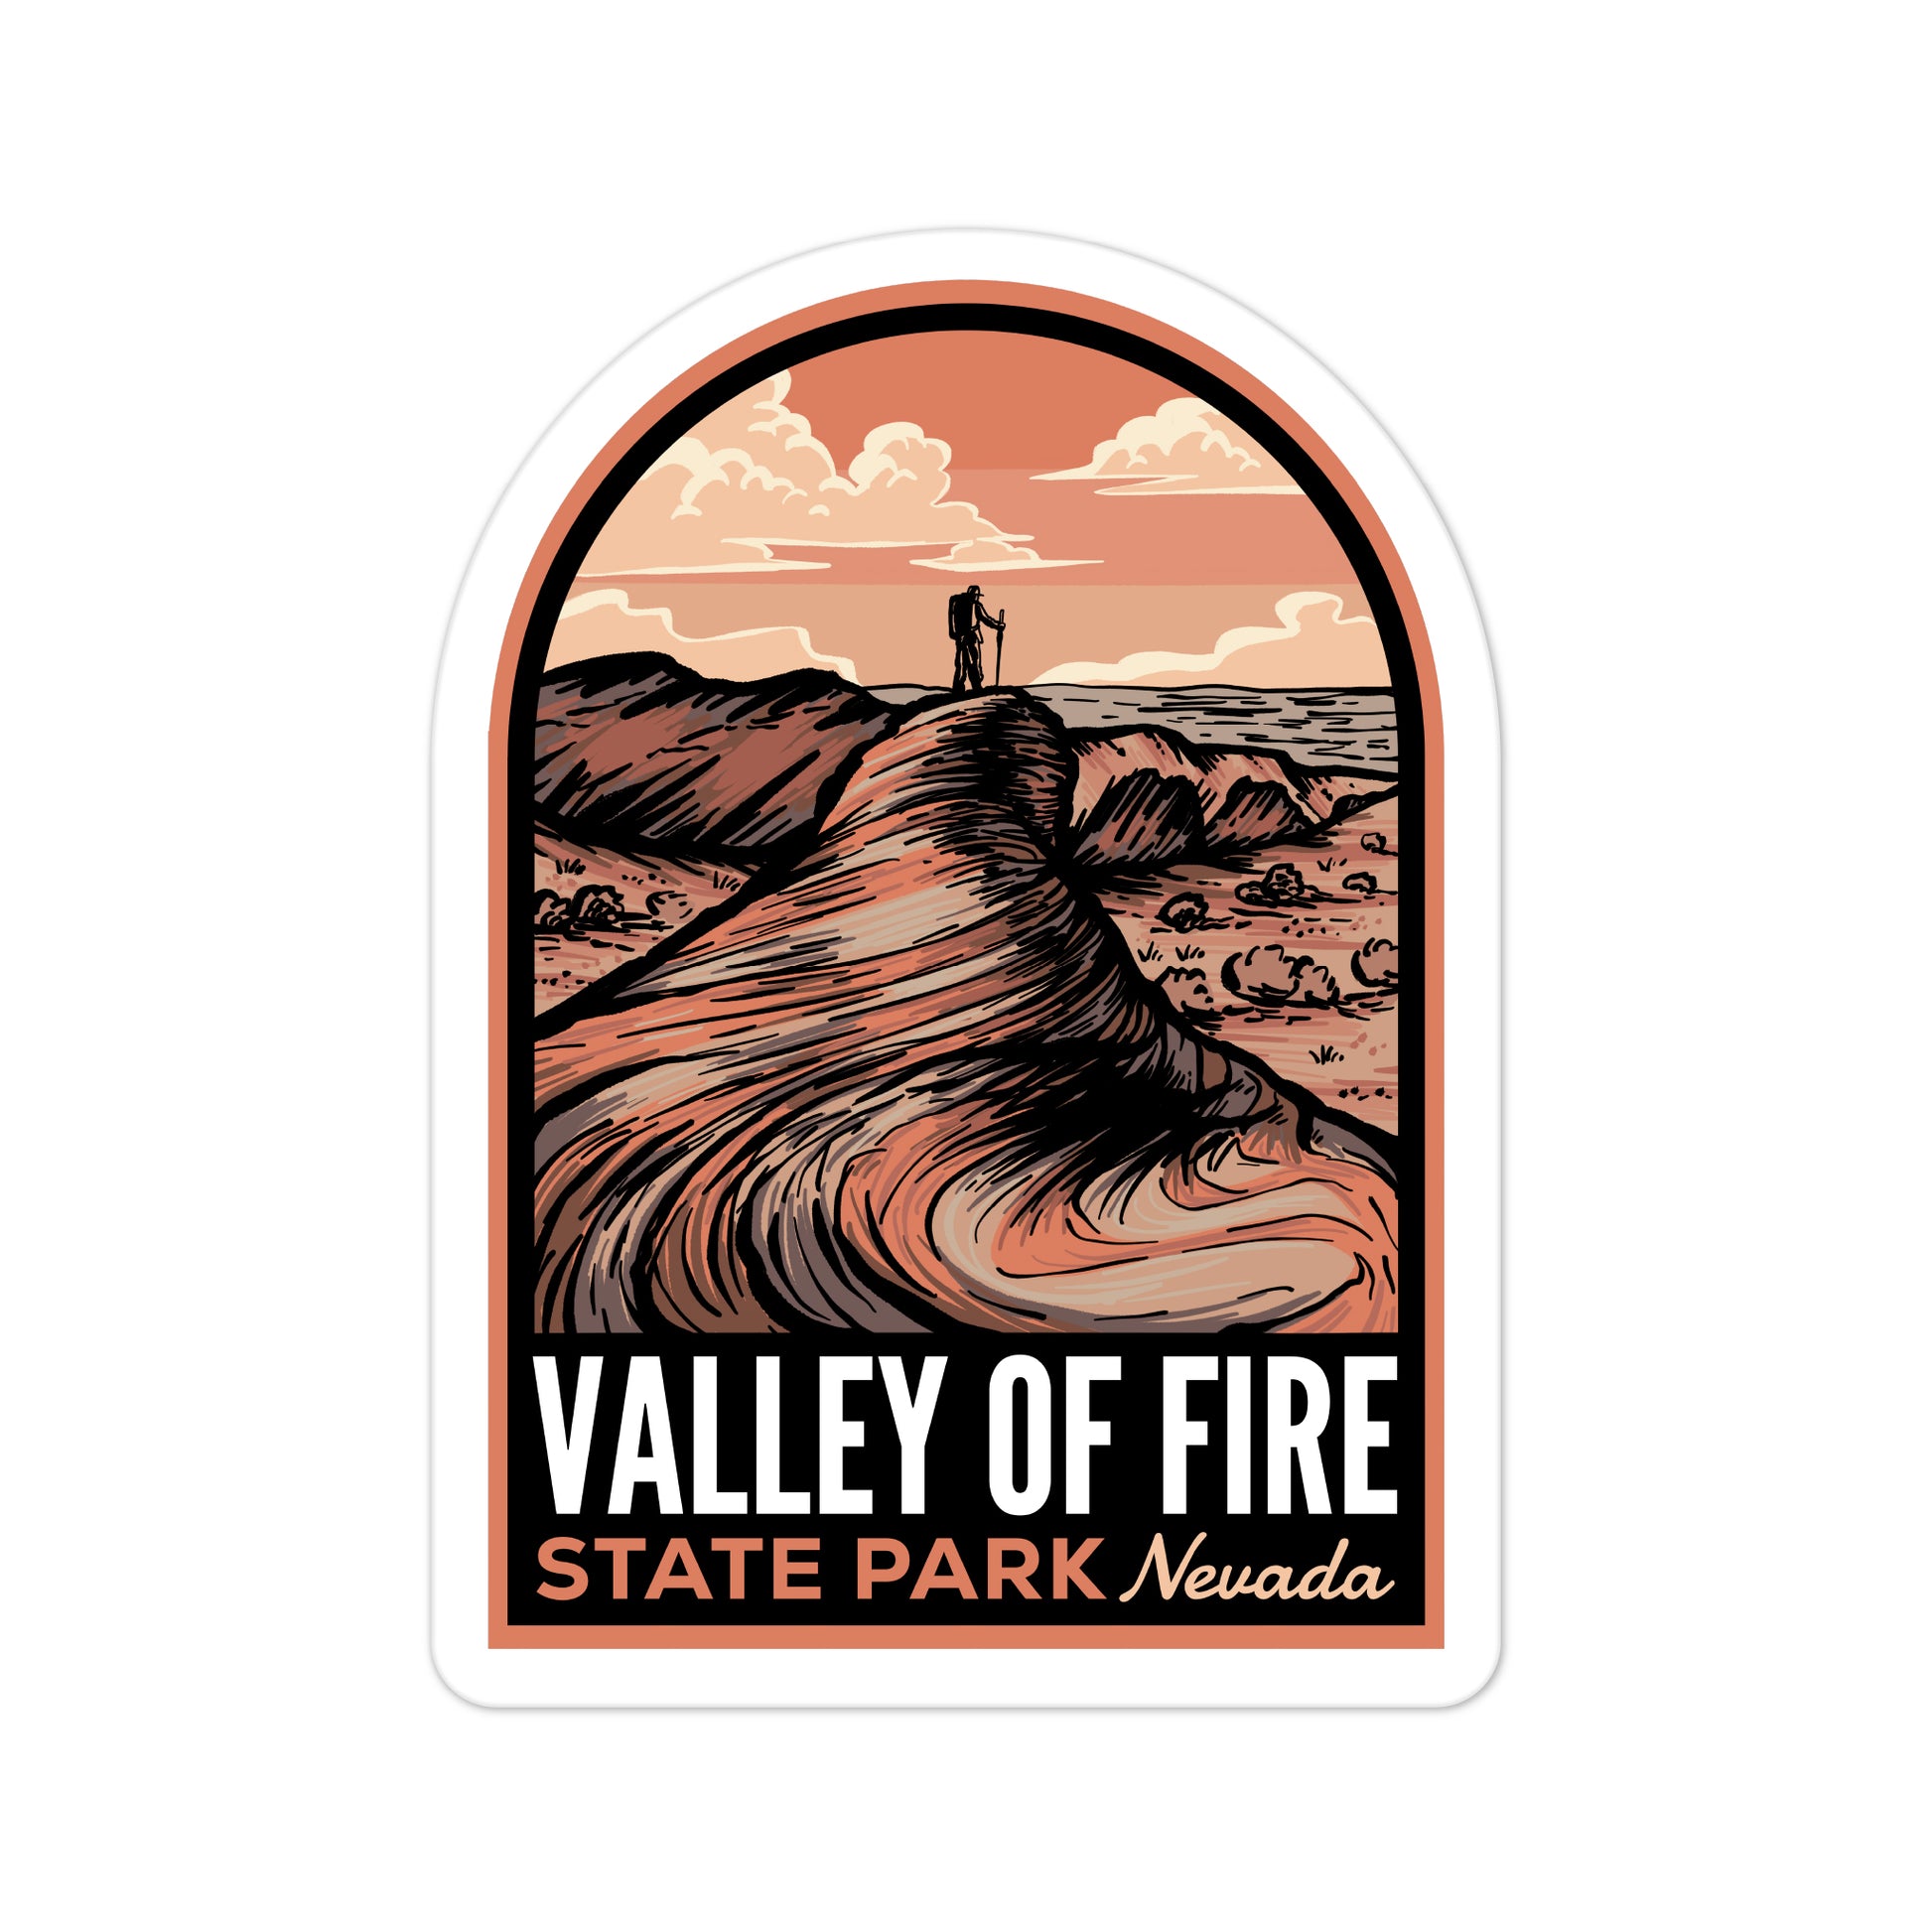 A sticker of Valley of Fire State Park